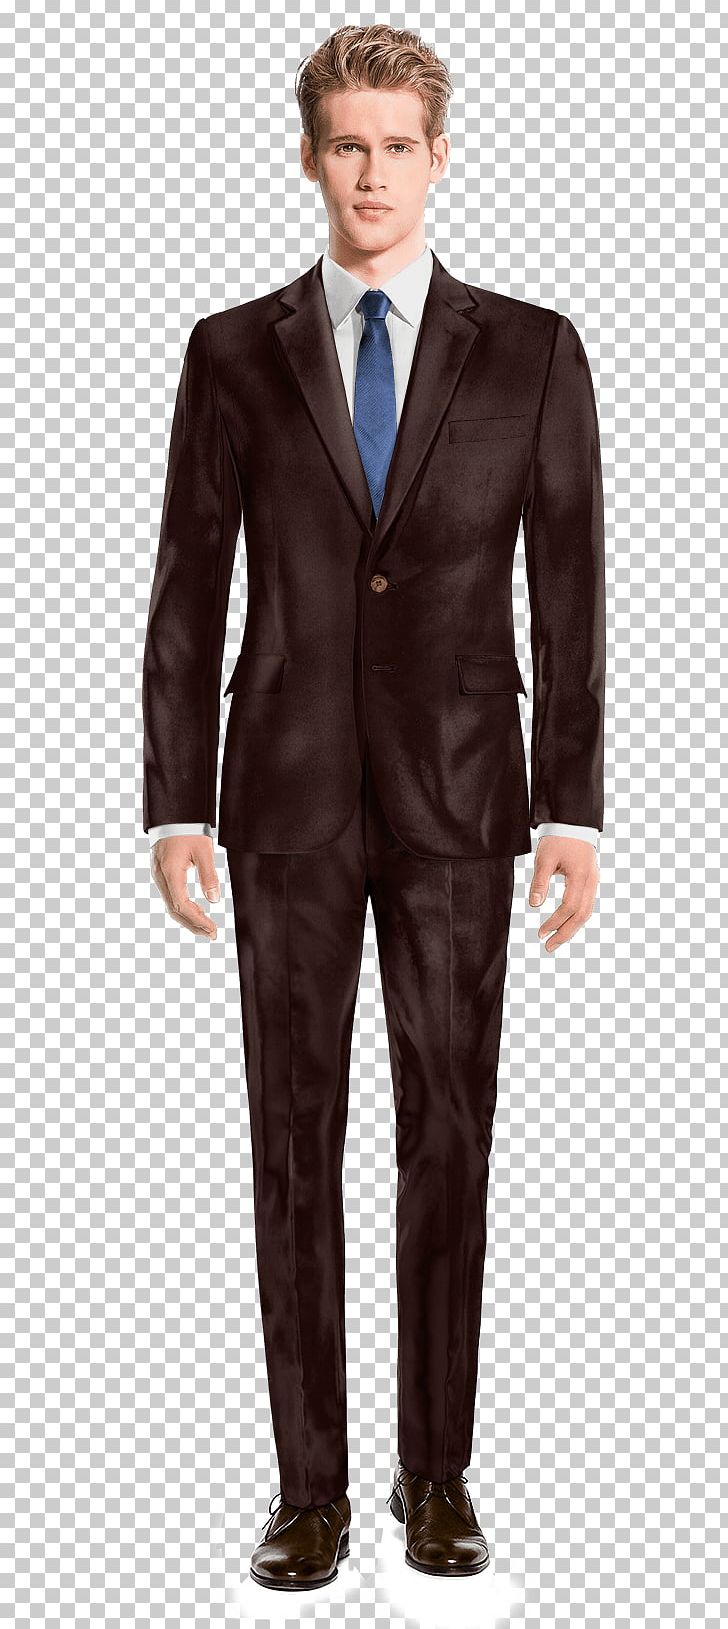 Suit Tweed Pants Chino Cloth Clothing PNG, Clipart, Blazer, Chino Cloth, Clothing, Costume, Costume Homme Free PNG Download